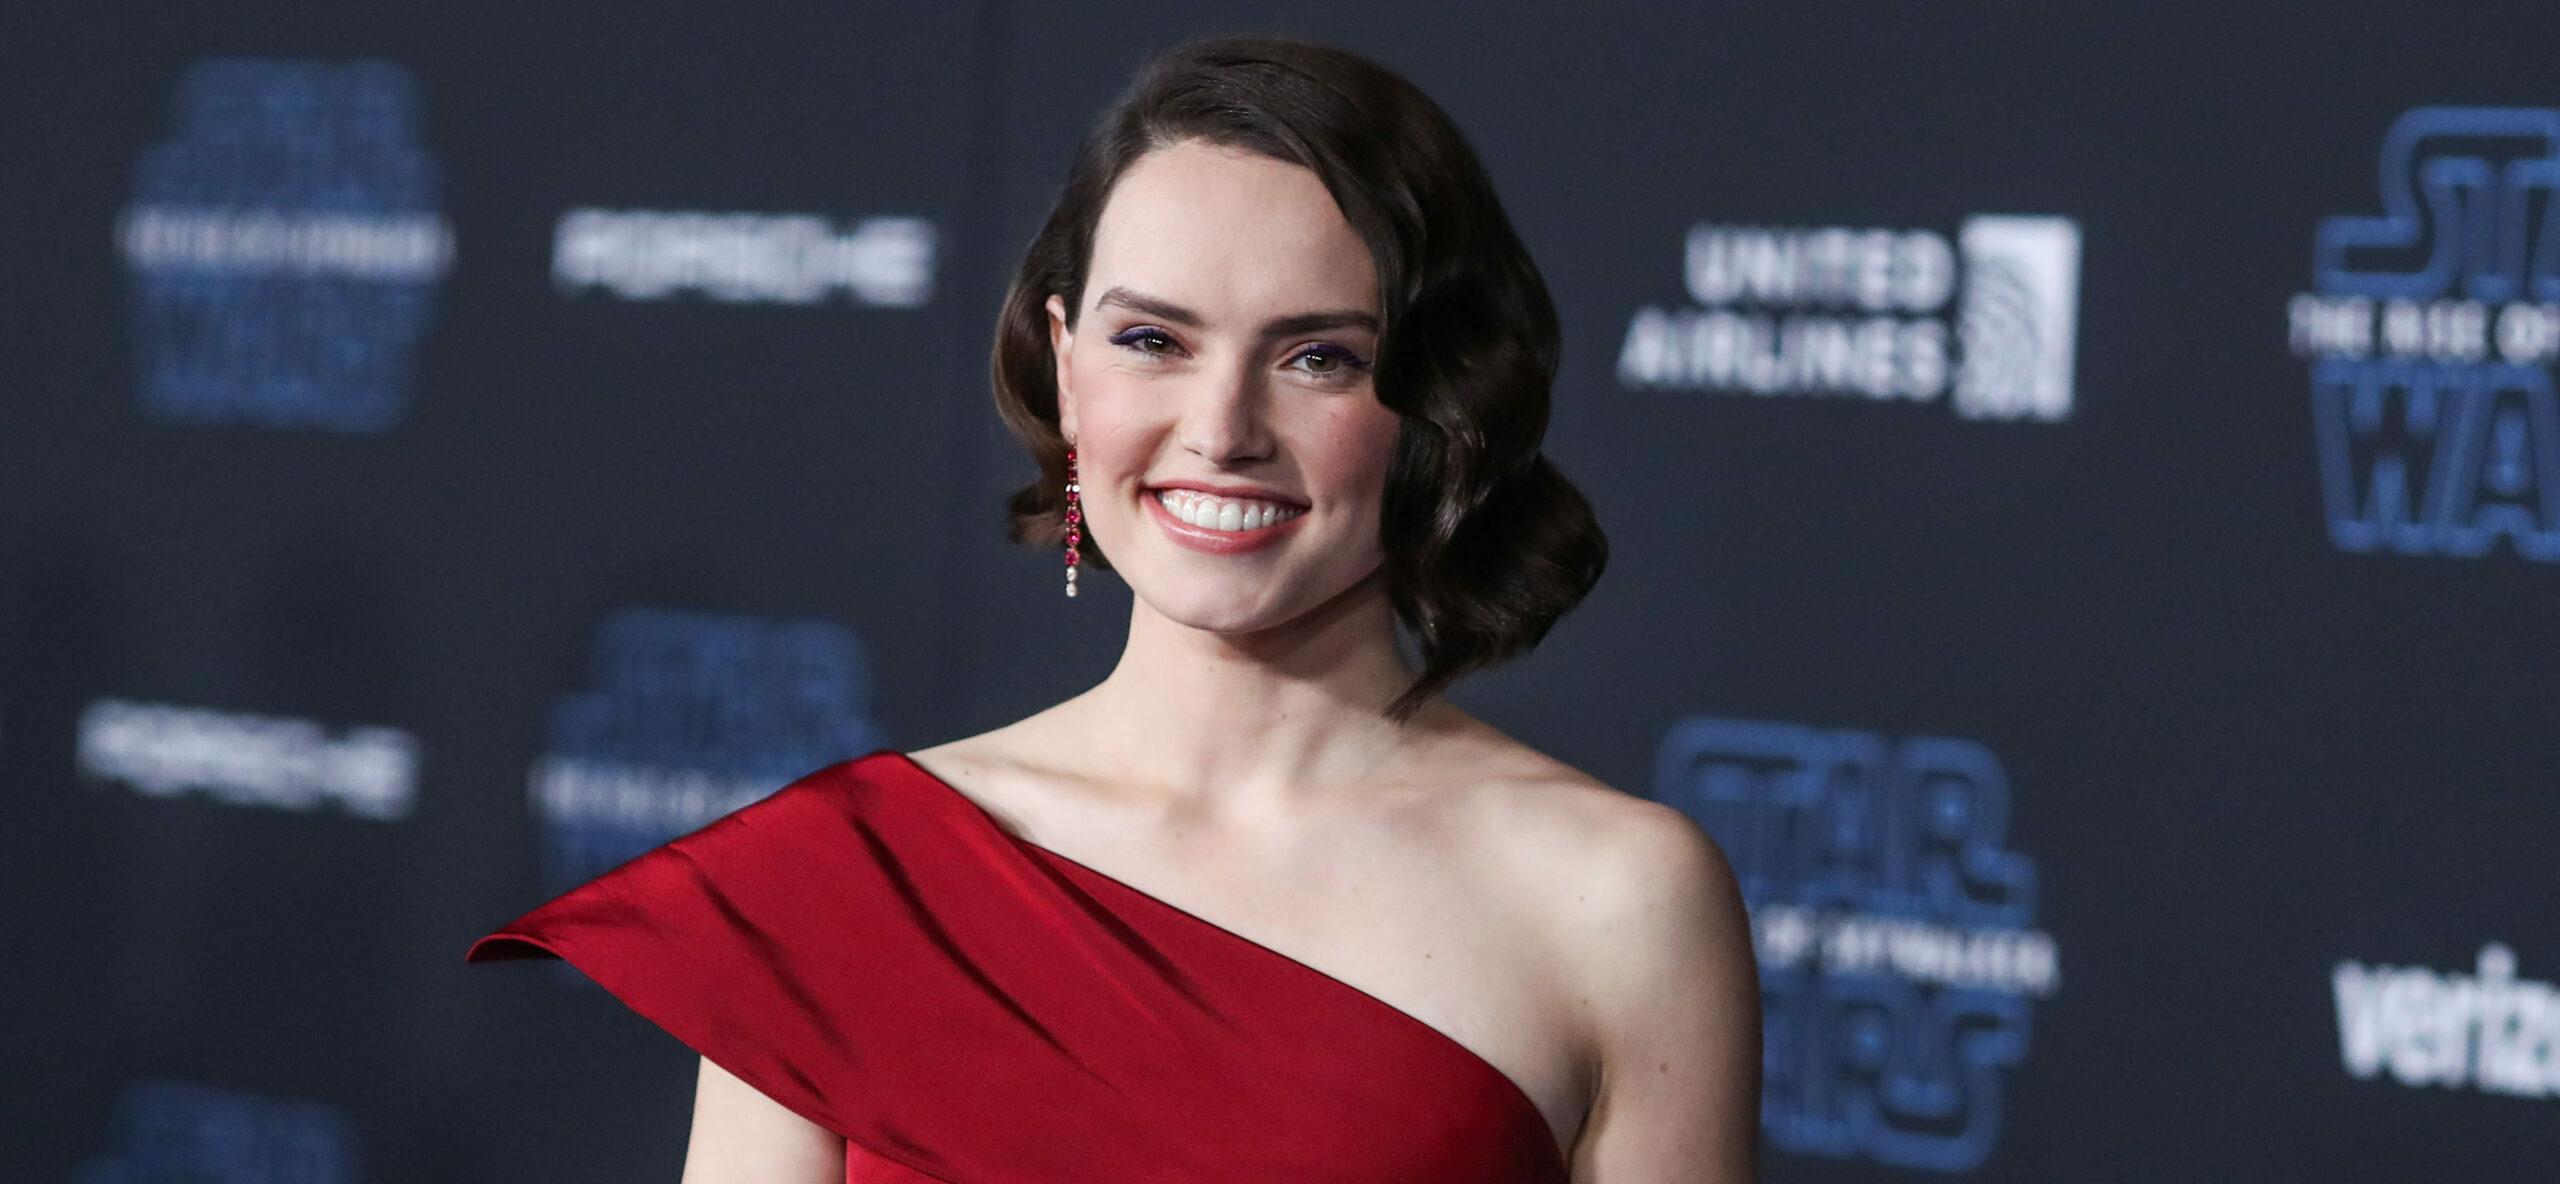 Daisy Ridley Is Reportedly Not The Star Of New ‘Star Wars’ Movie